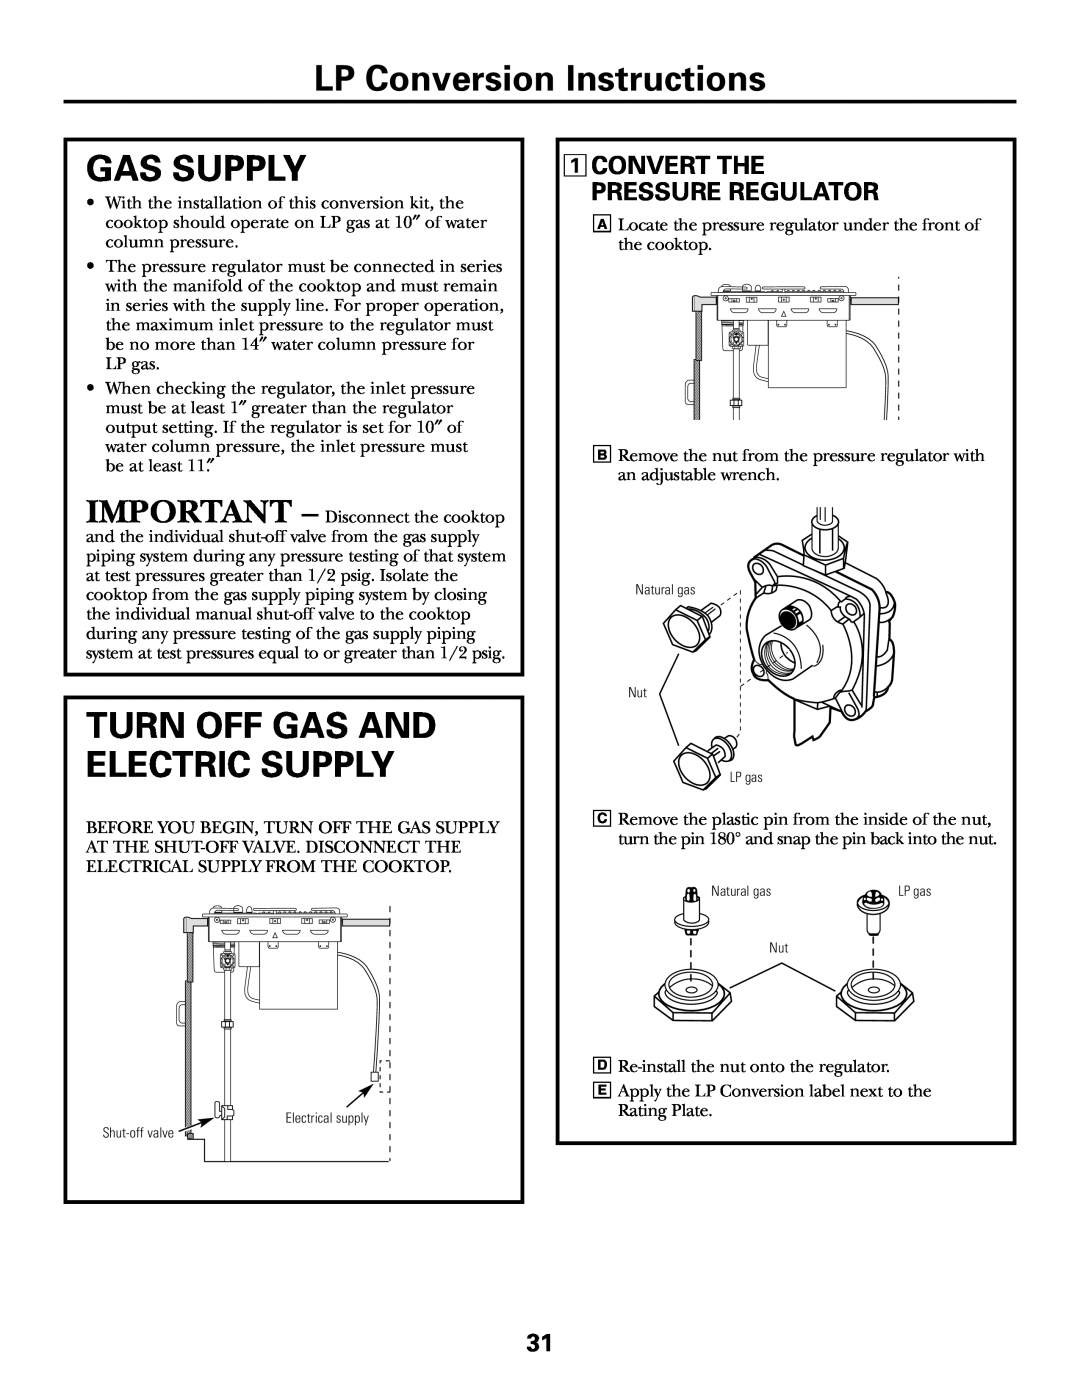 GE JGP985 LP Conversion Instructions, Gas Supply, Turn Off Gas And Electric Supply, 1CONVERT THE PRESSURE REGULATOR 